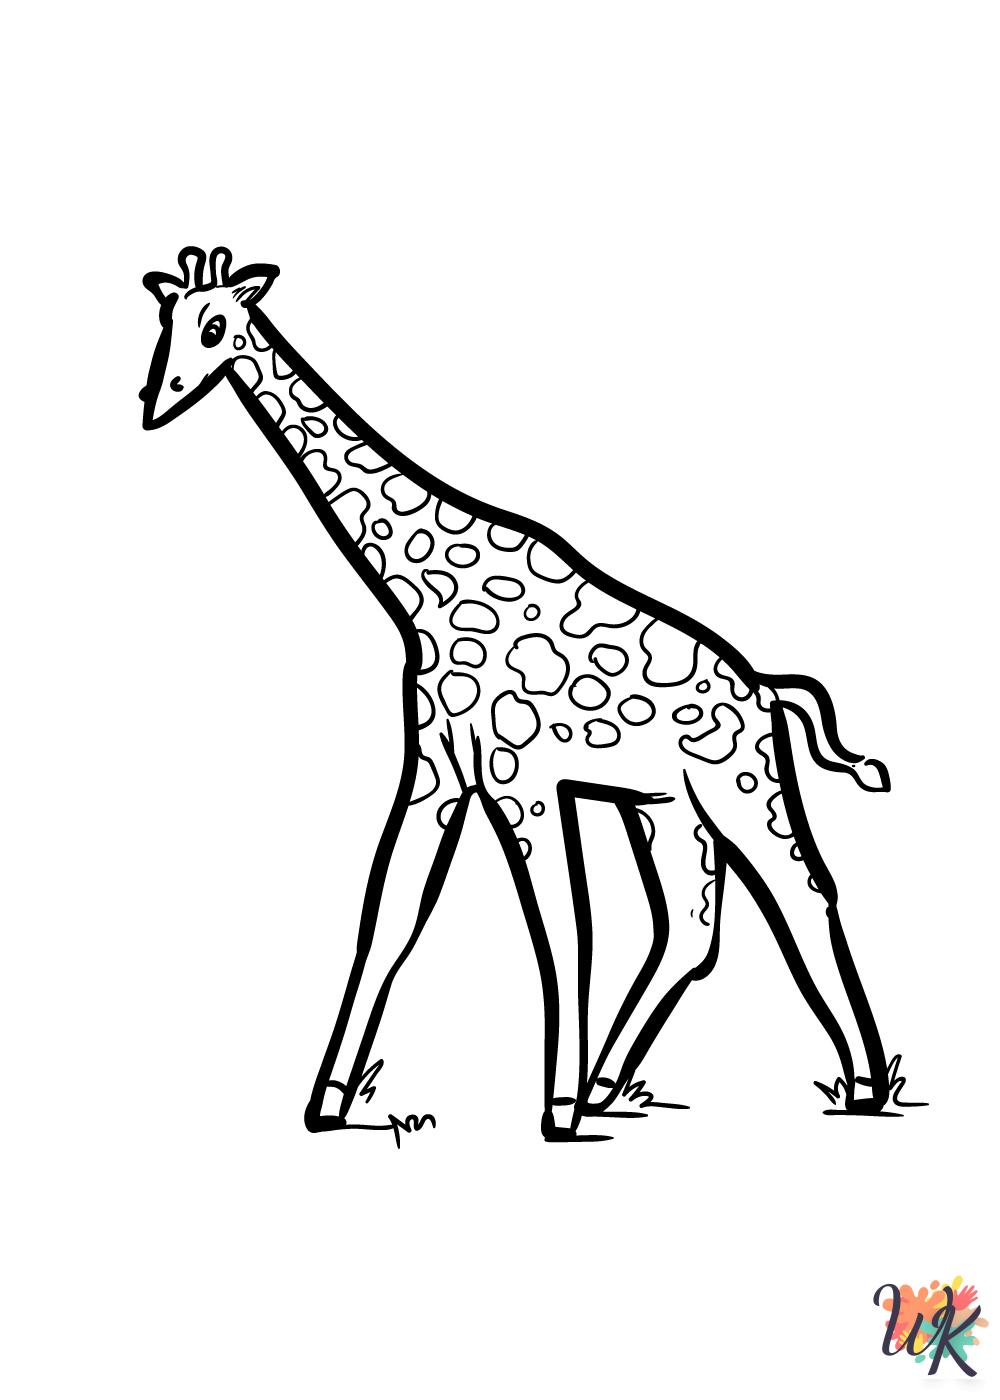 Giraffe coloring pages for adults easy